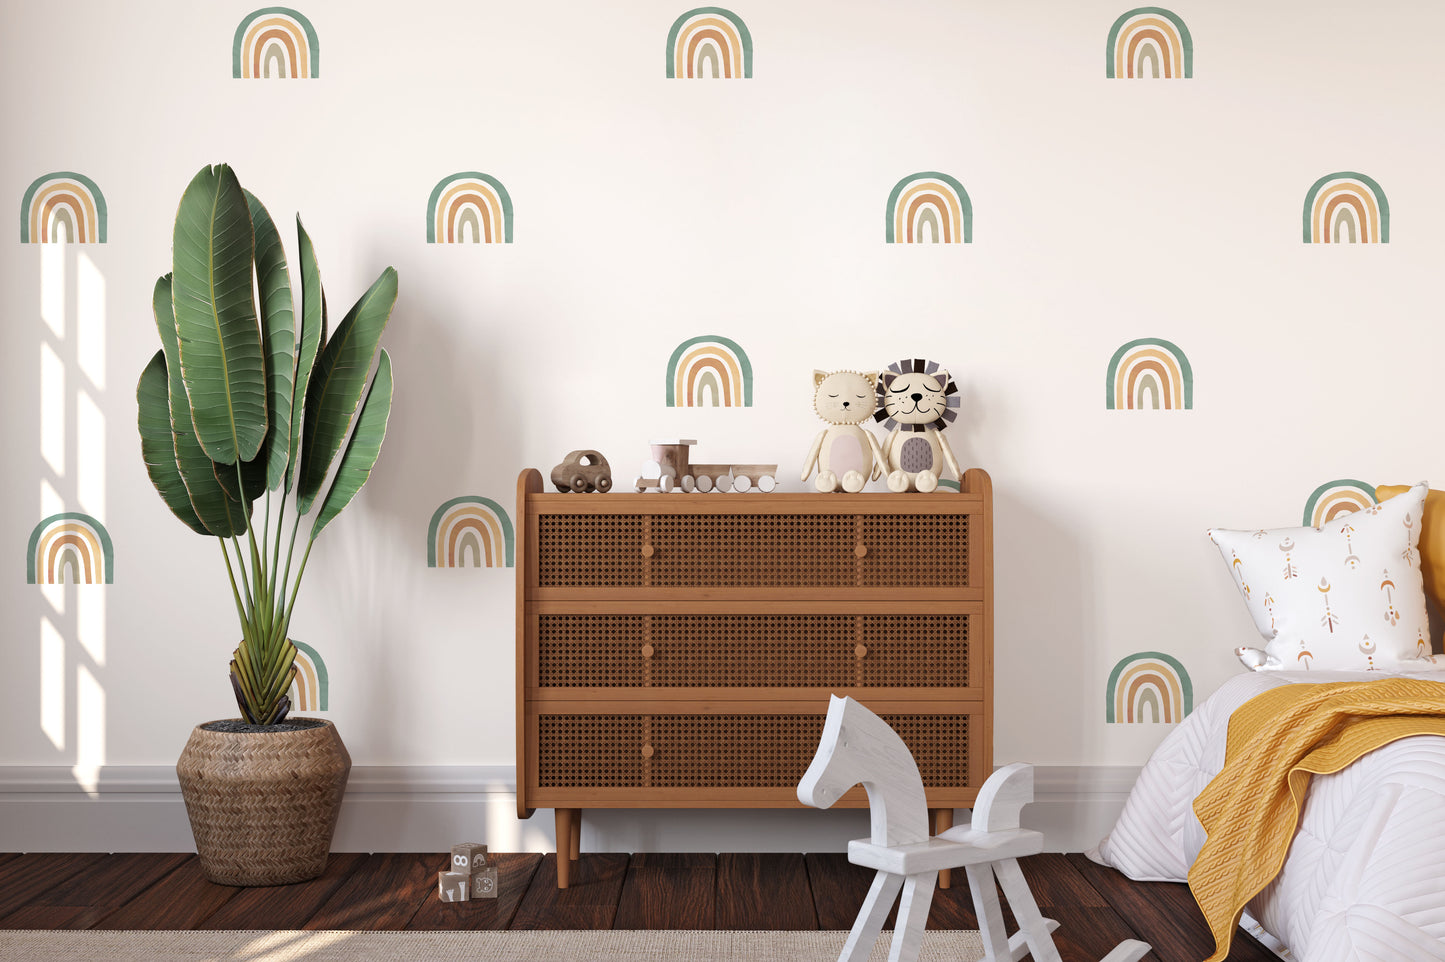 Rainbow Wall Decals (Sage) - Wall Decals - Fable and Fawn 